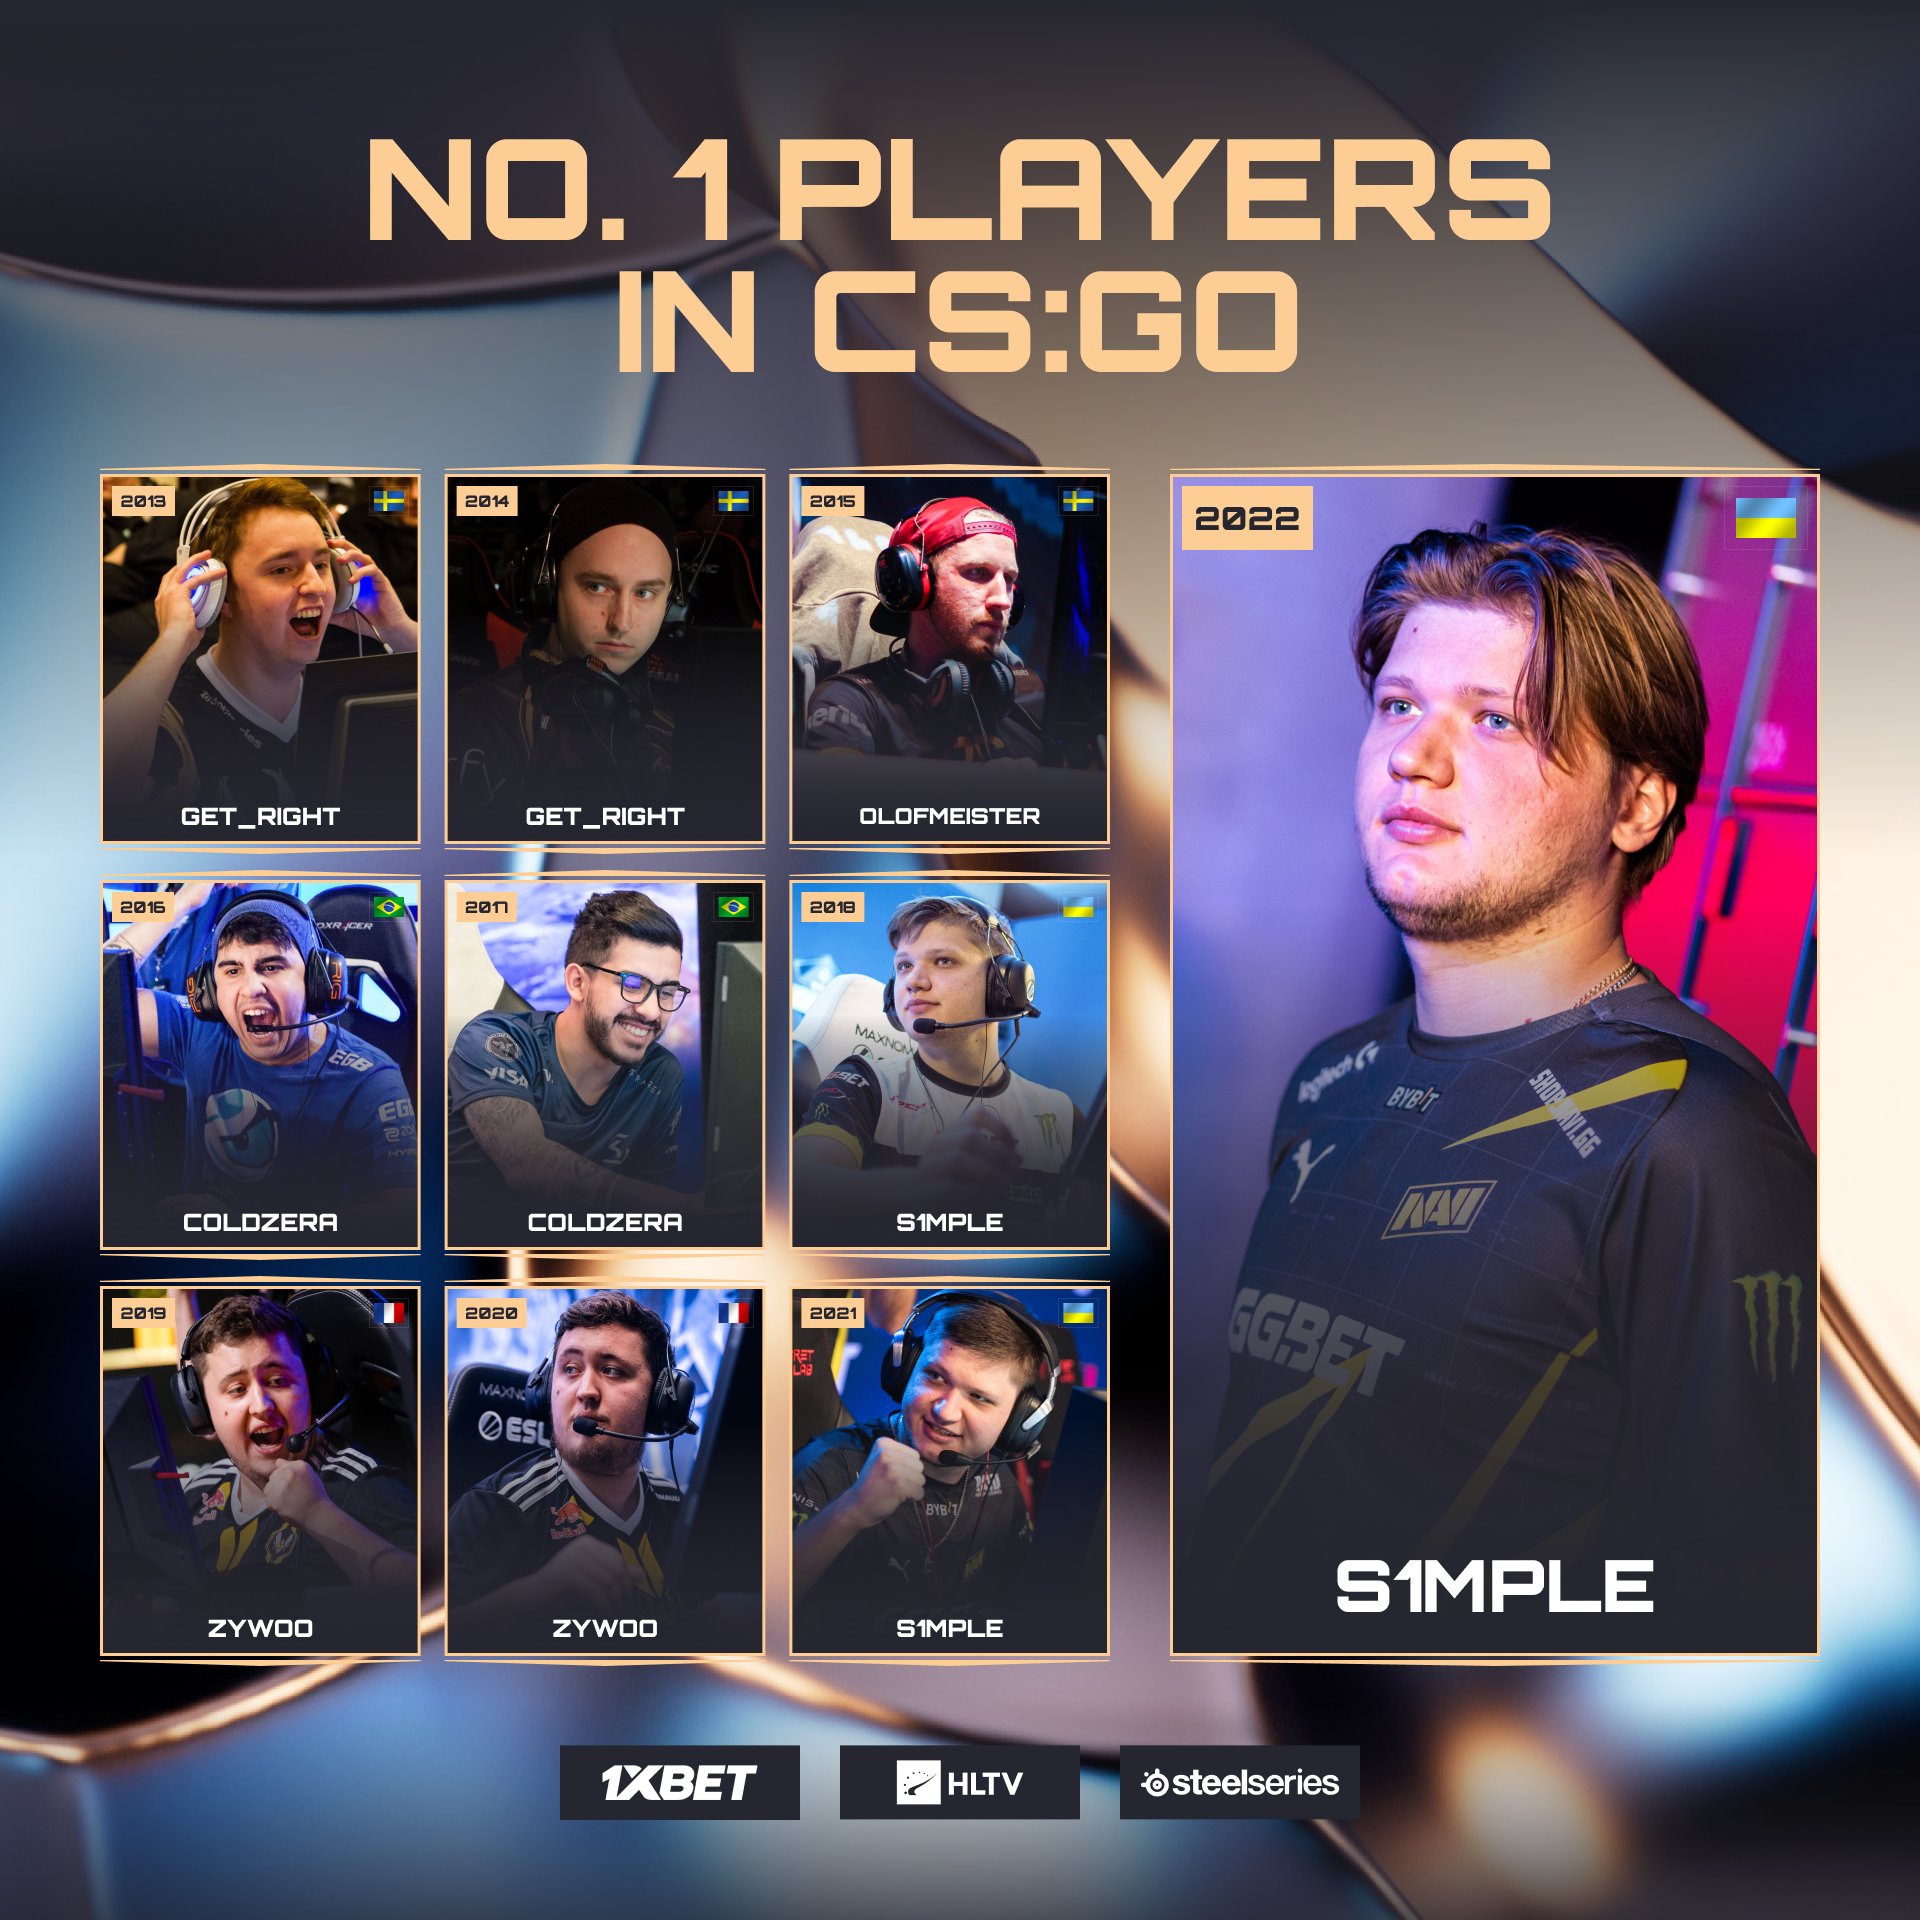 HLTV.org's Top 20 players of 2016 